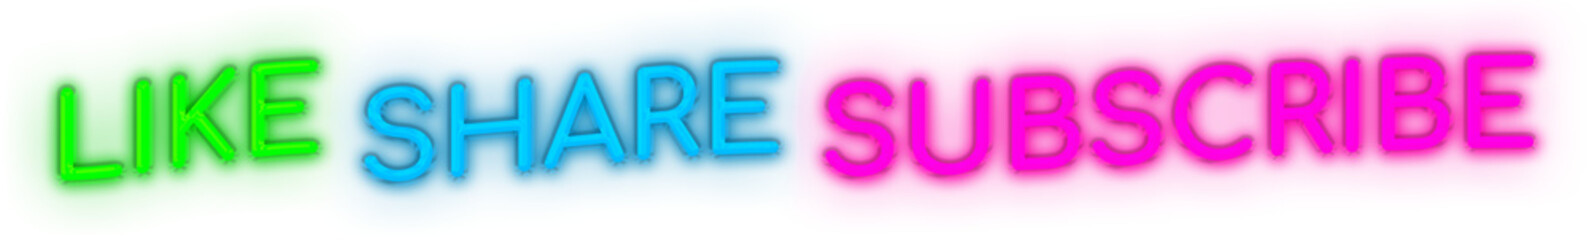 Like Share Subscribe neon PNG file.